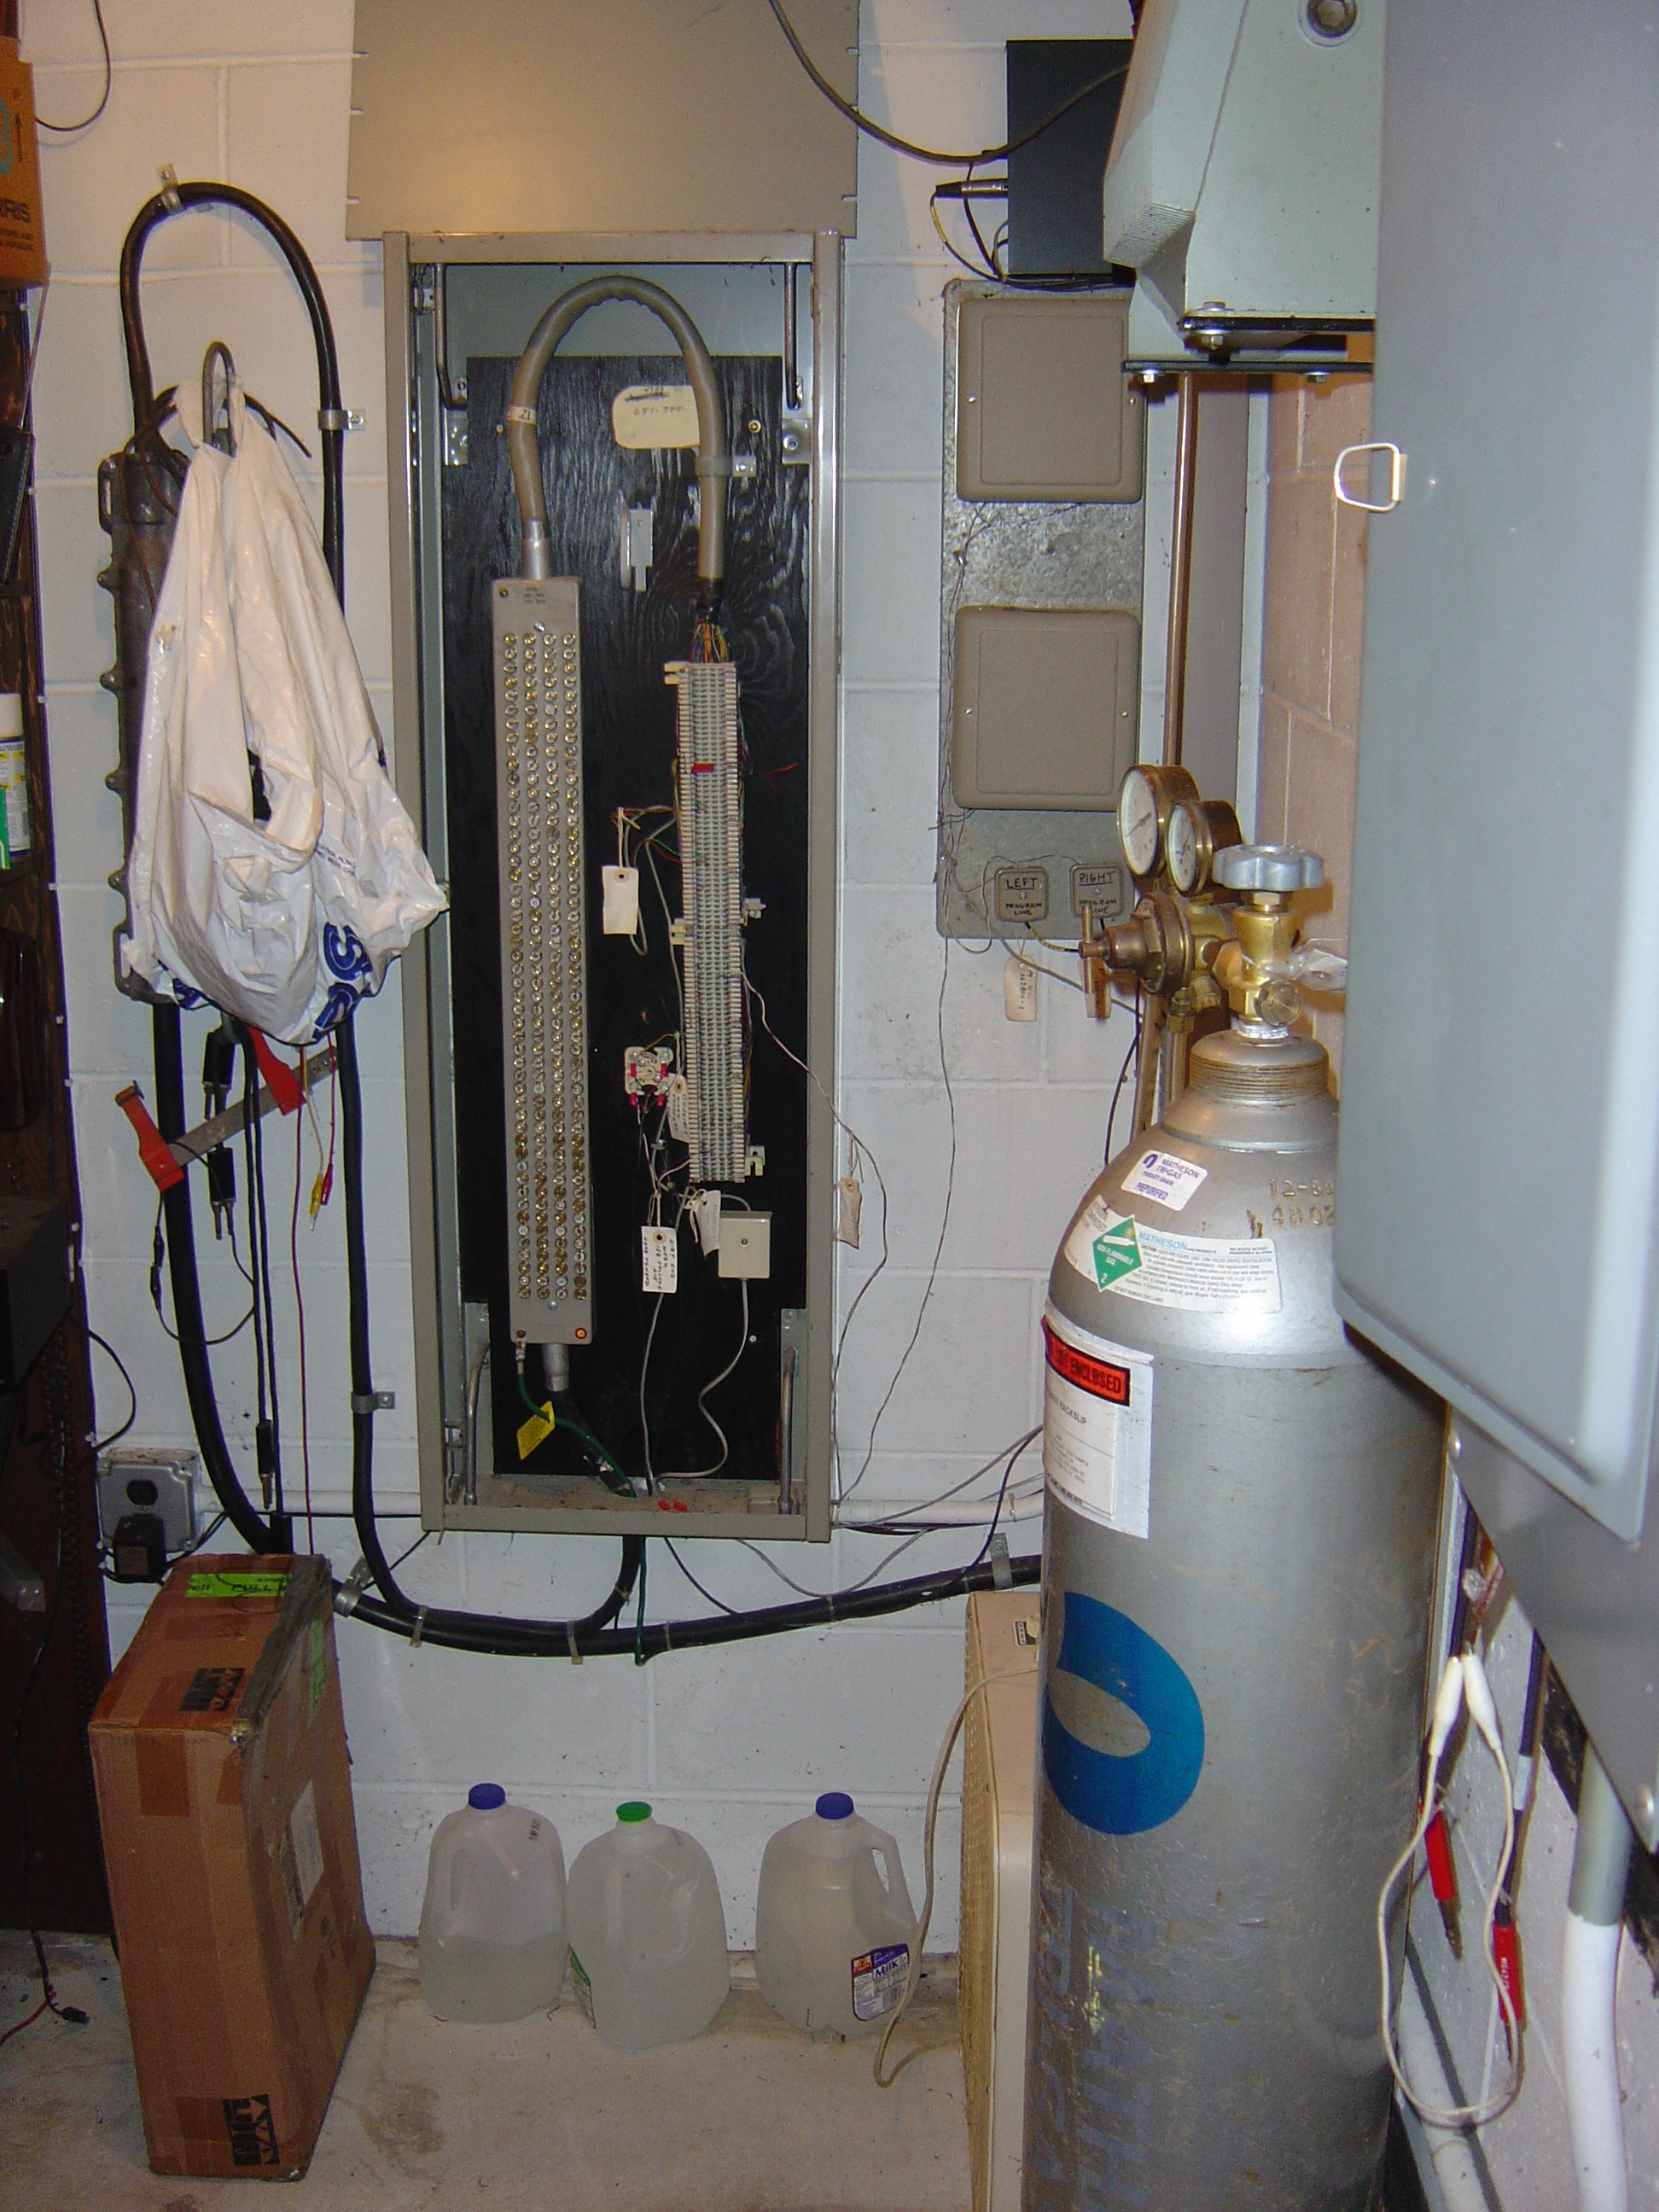 2006 - Analog Telco Interface and the Nitrogen Tank